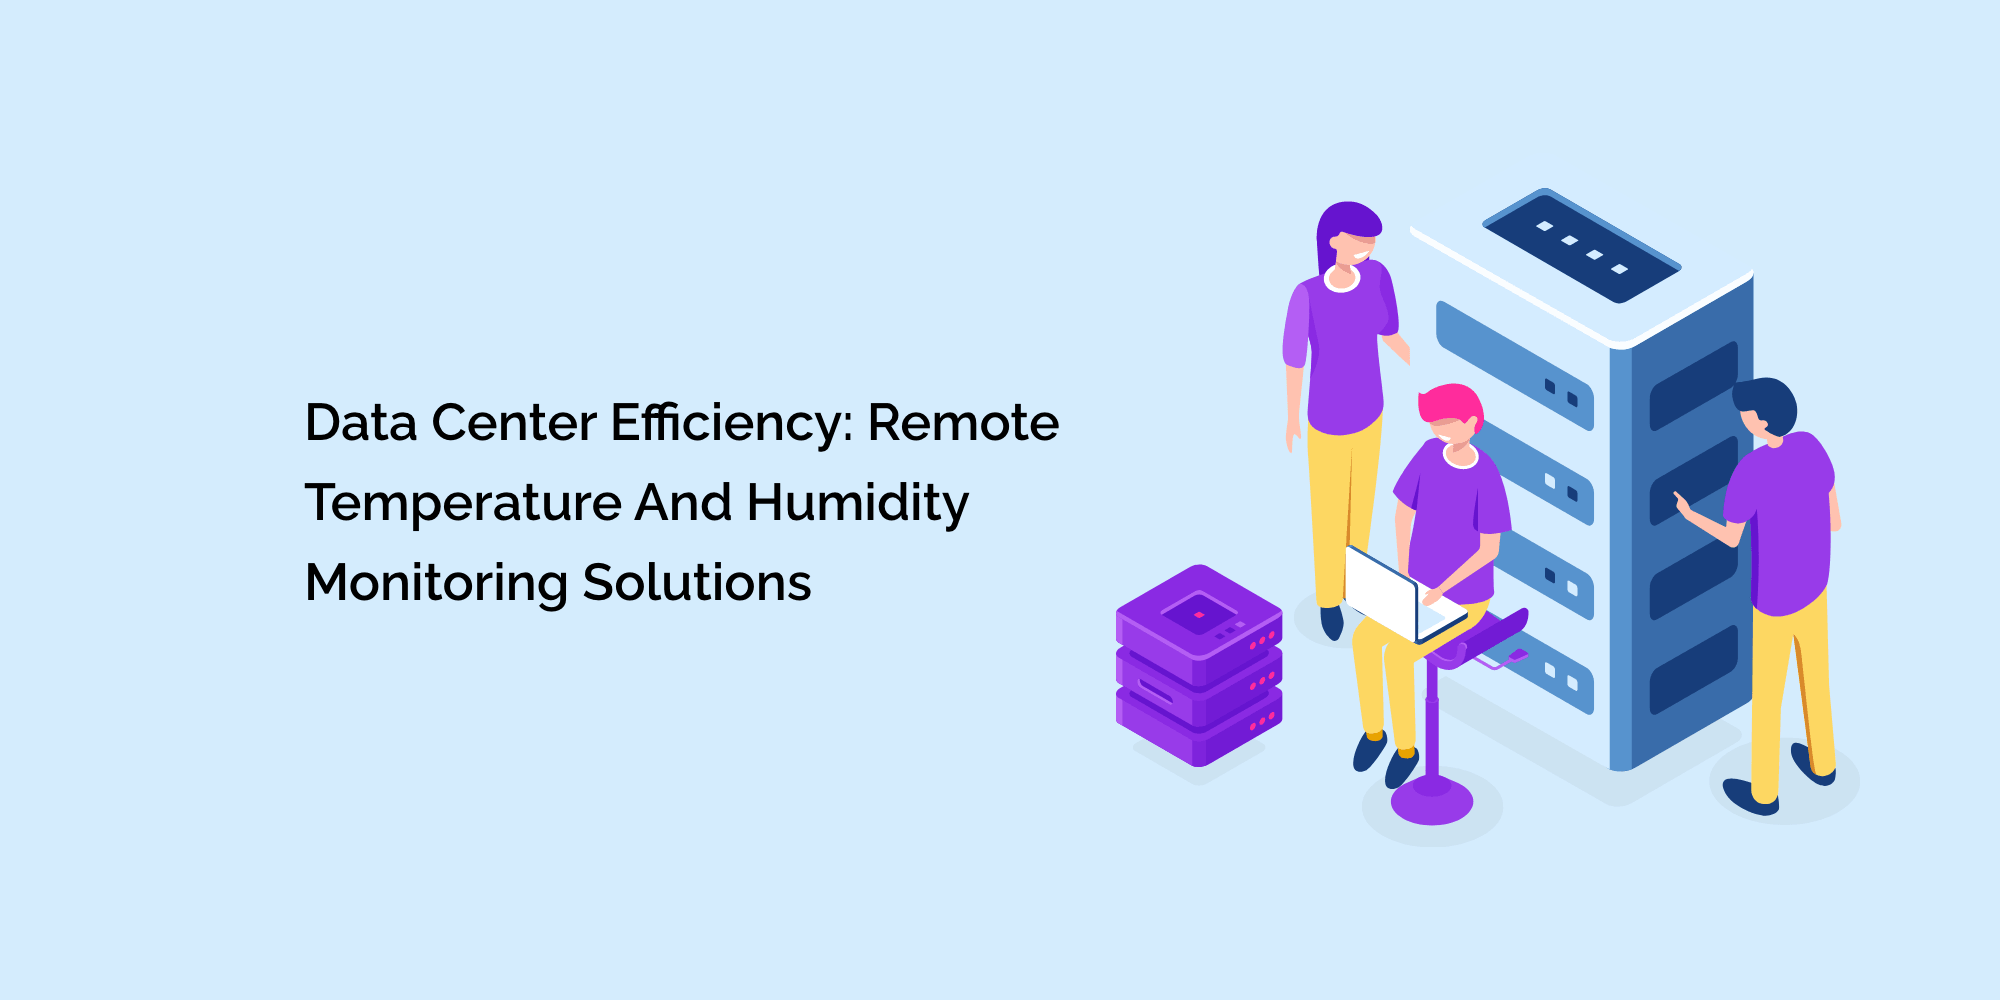 Data Center Efficiency: Remote Temperature and Humidity Monitoring Solutions